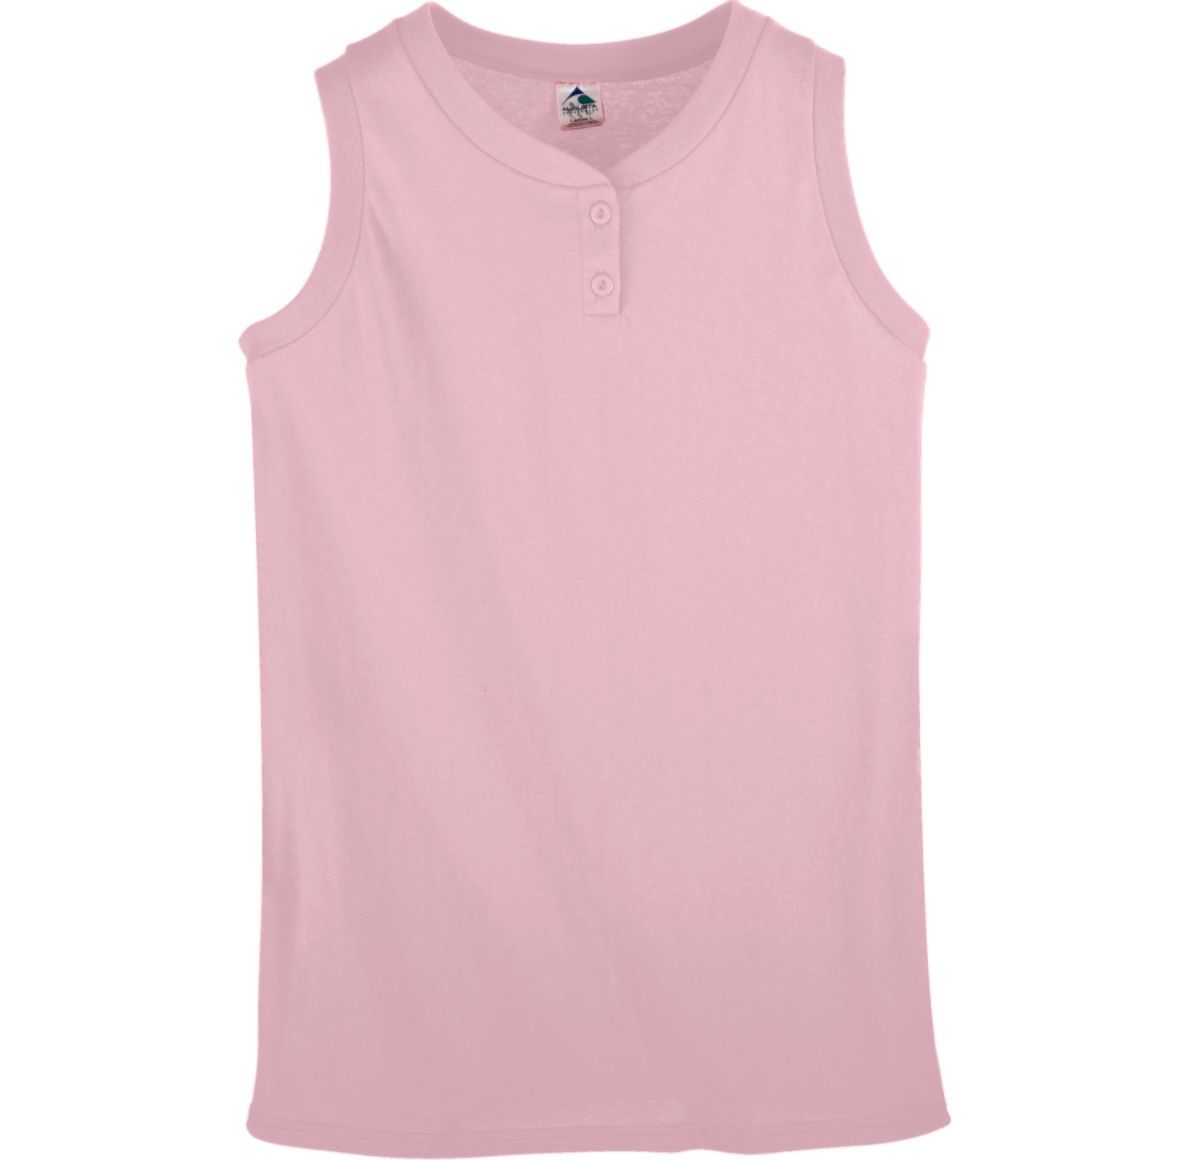 Augusta Sportswear Girls Sleeveless Two-Button Softball Jersey in Light Pink  -Part of the Girls, Augusta-Products, Softball, Girls-Jersey, Shirts product lines at KanaleyCreations.com